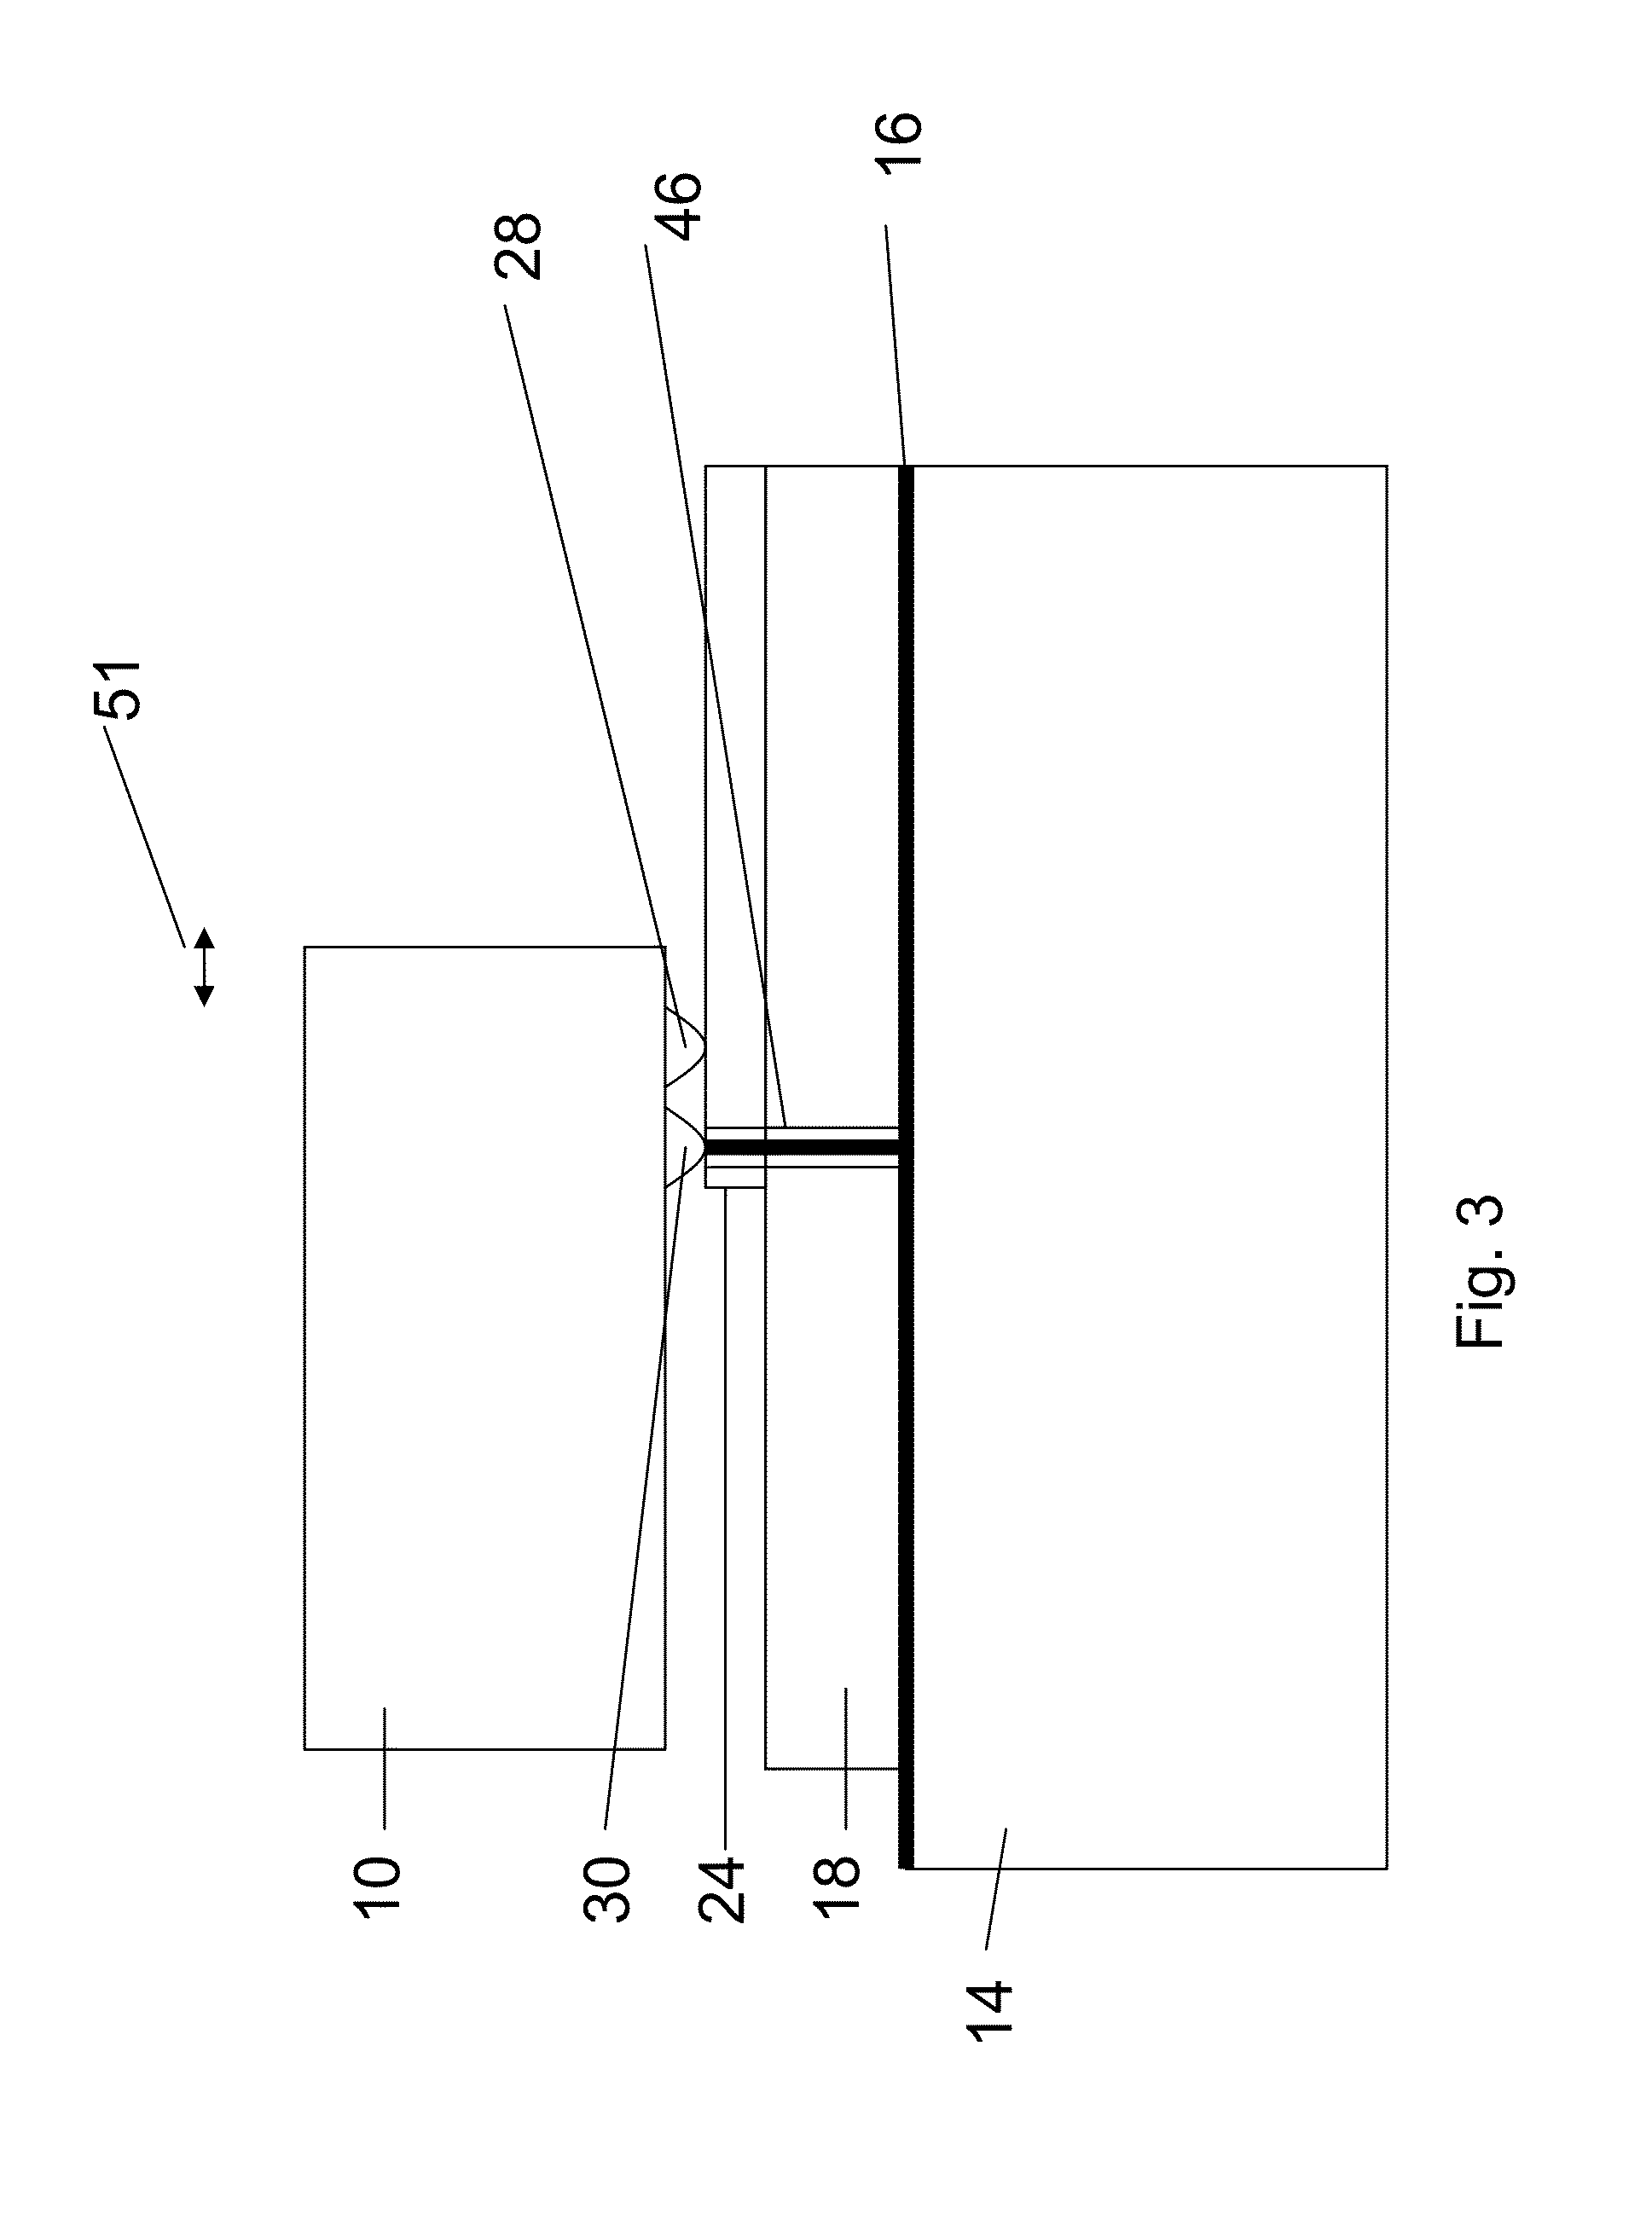 Interfacing between an integrated circuit and a waveguide through a cavity located in a soft laminate